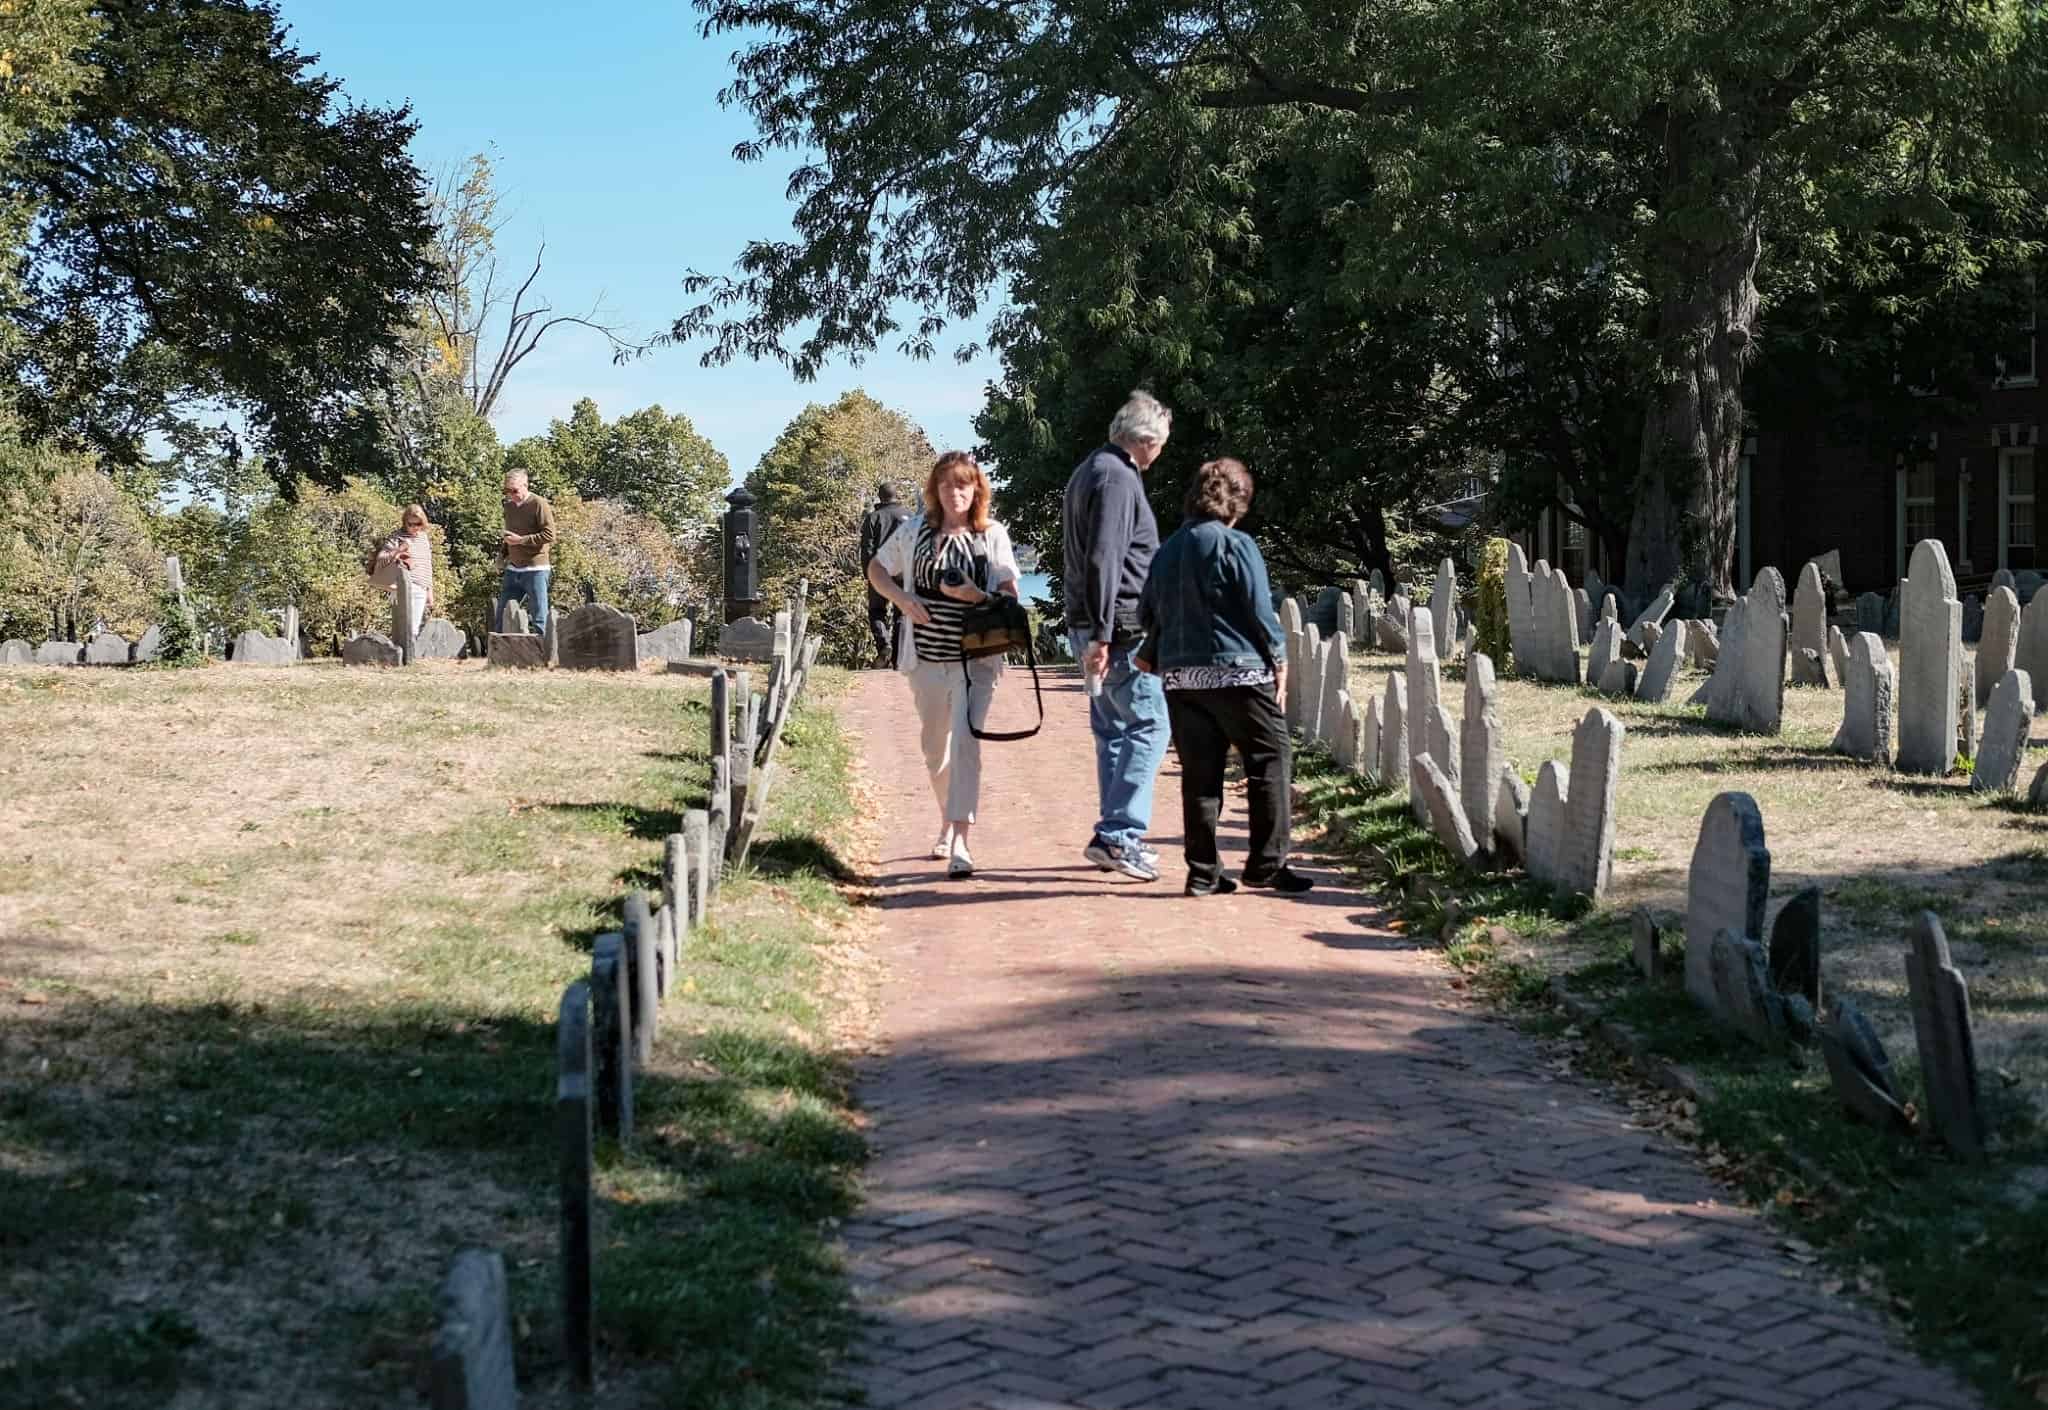 Visitors to an old graveyard in Boston, MA